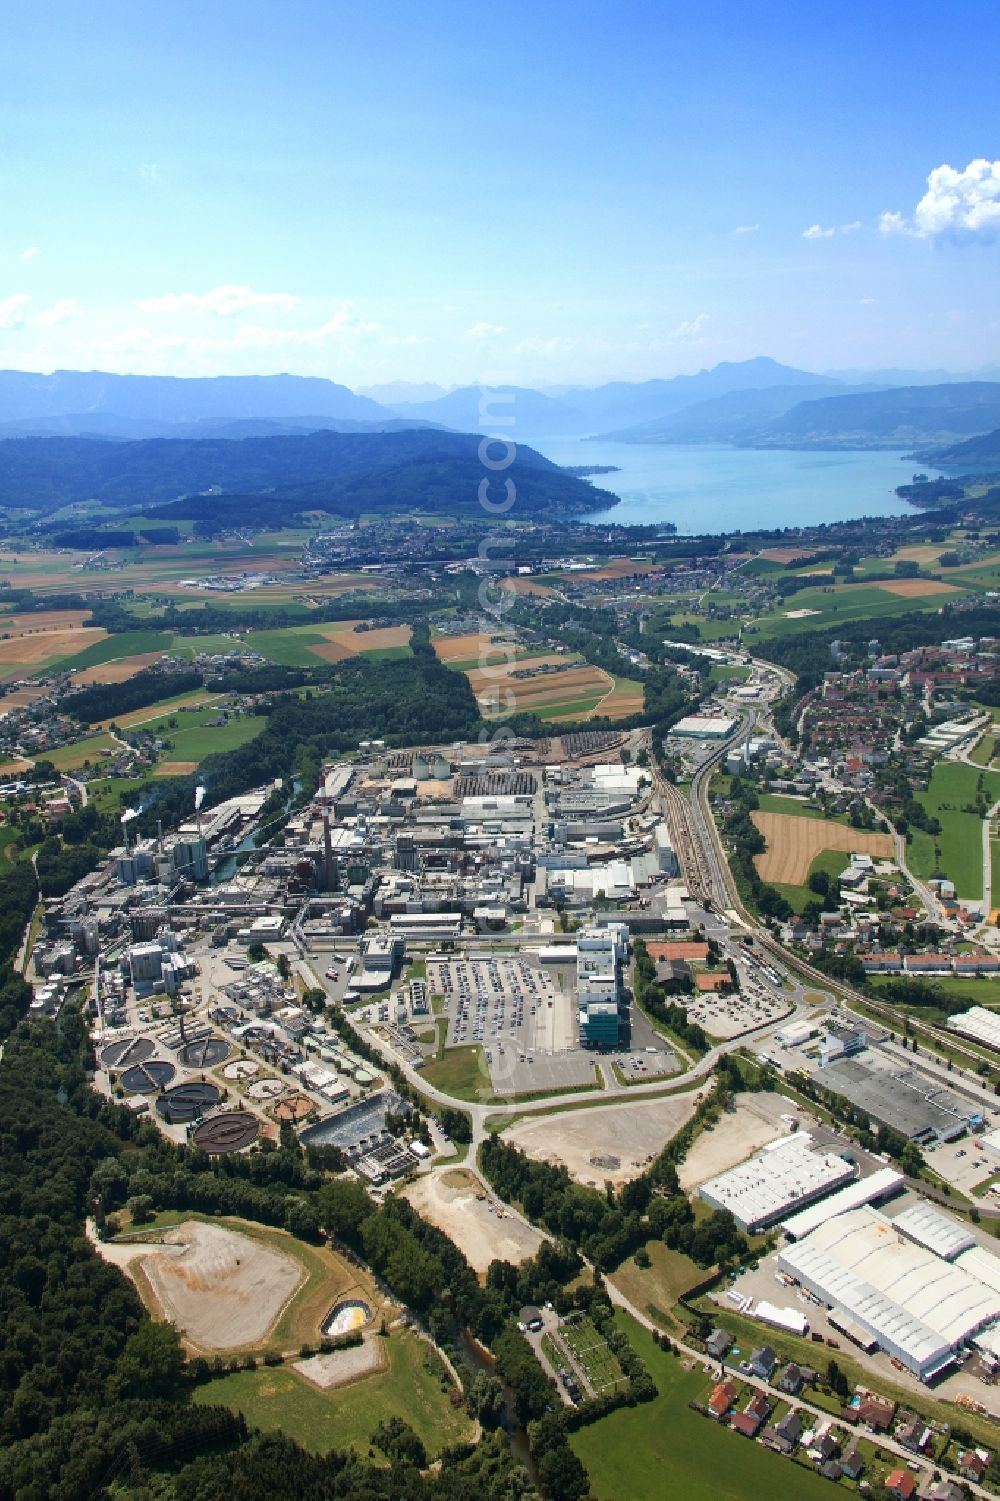 Lenzing from the bird's eye view: Building and production halls on the premises of Lenzing Plastics GmbH & Co.KG in Lenzing in Oberoesterreich, Austria